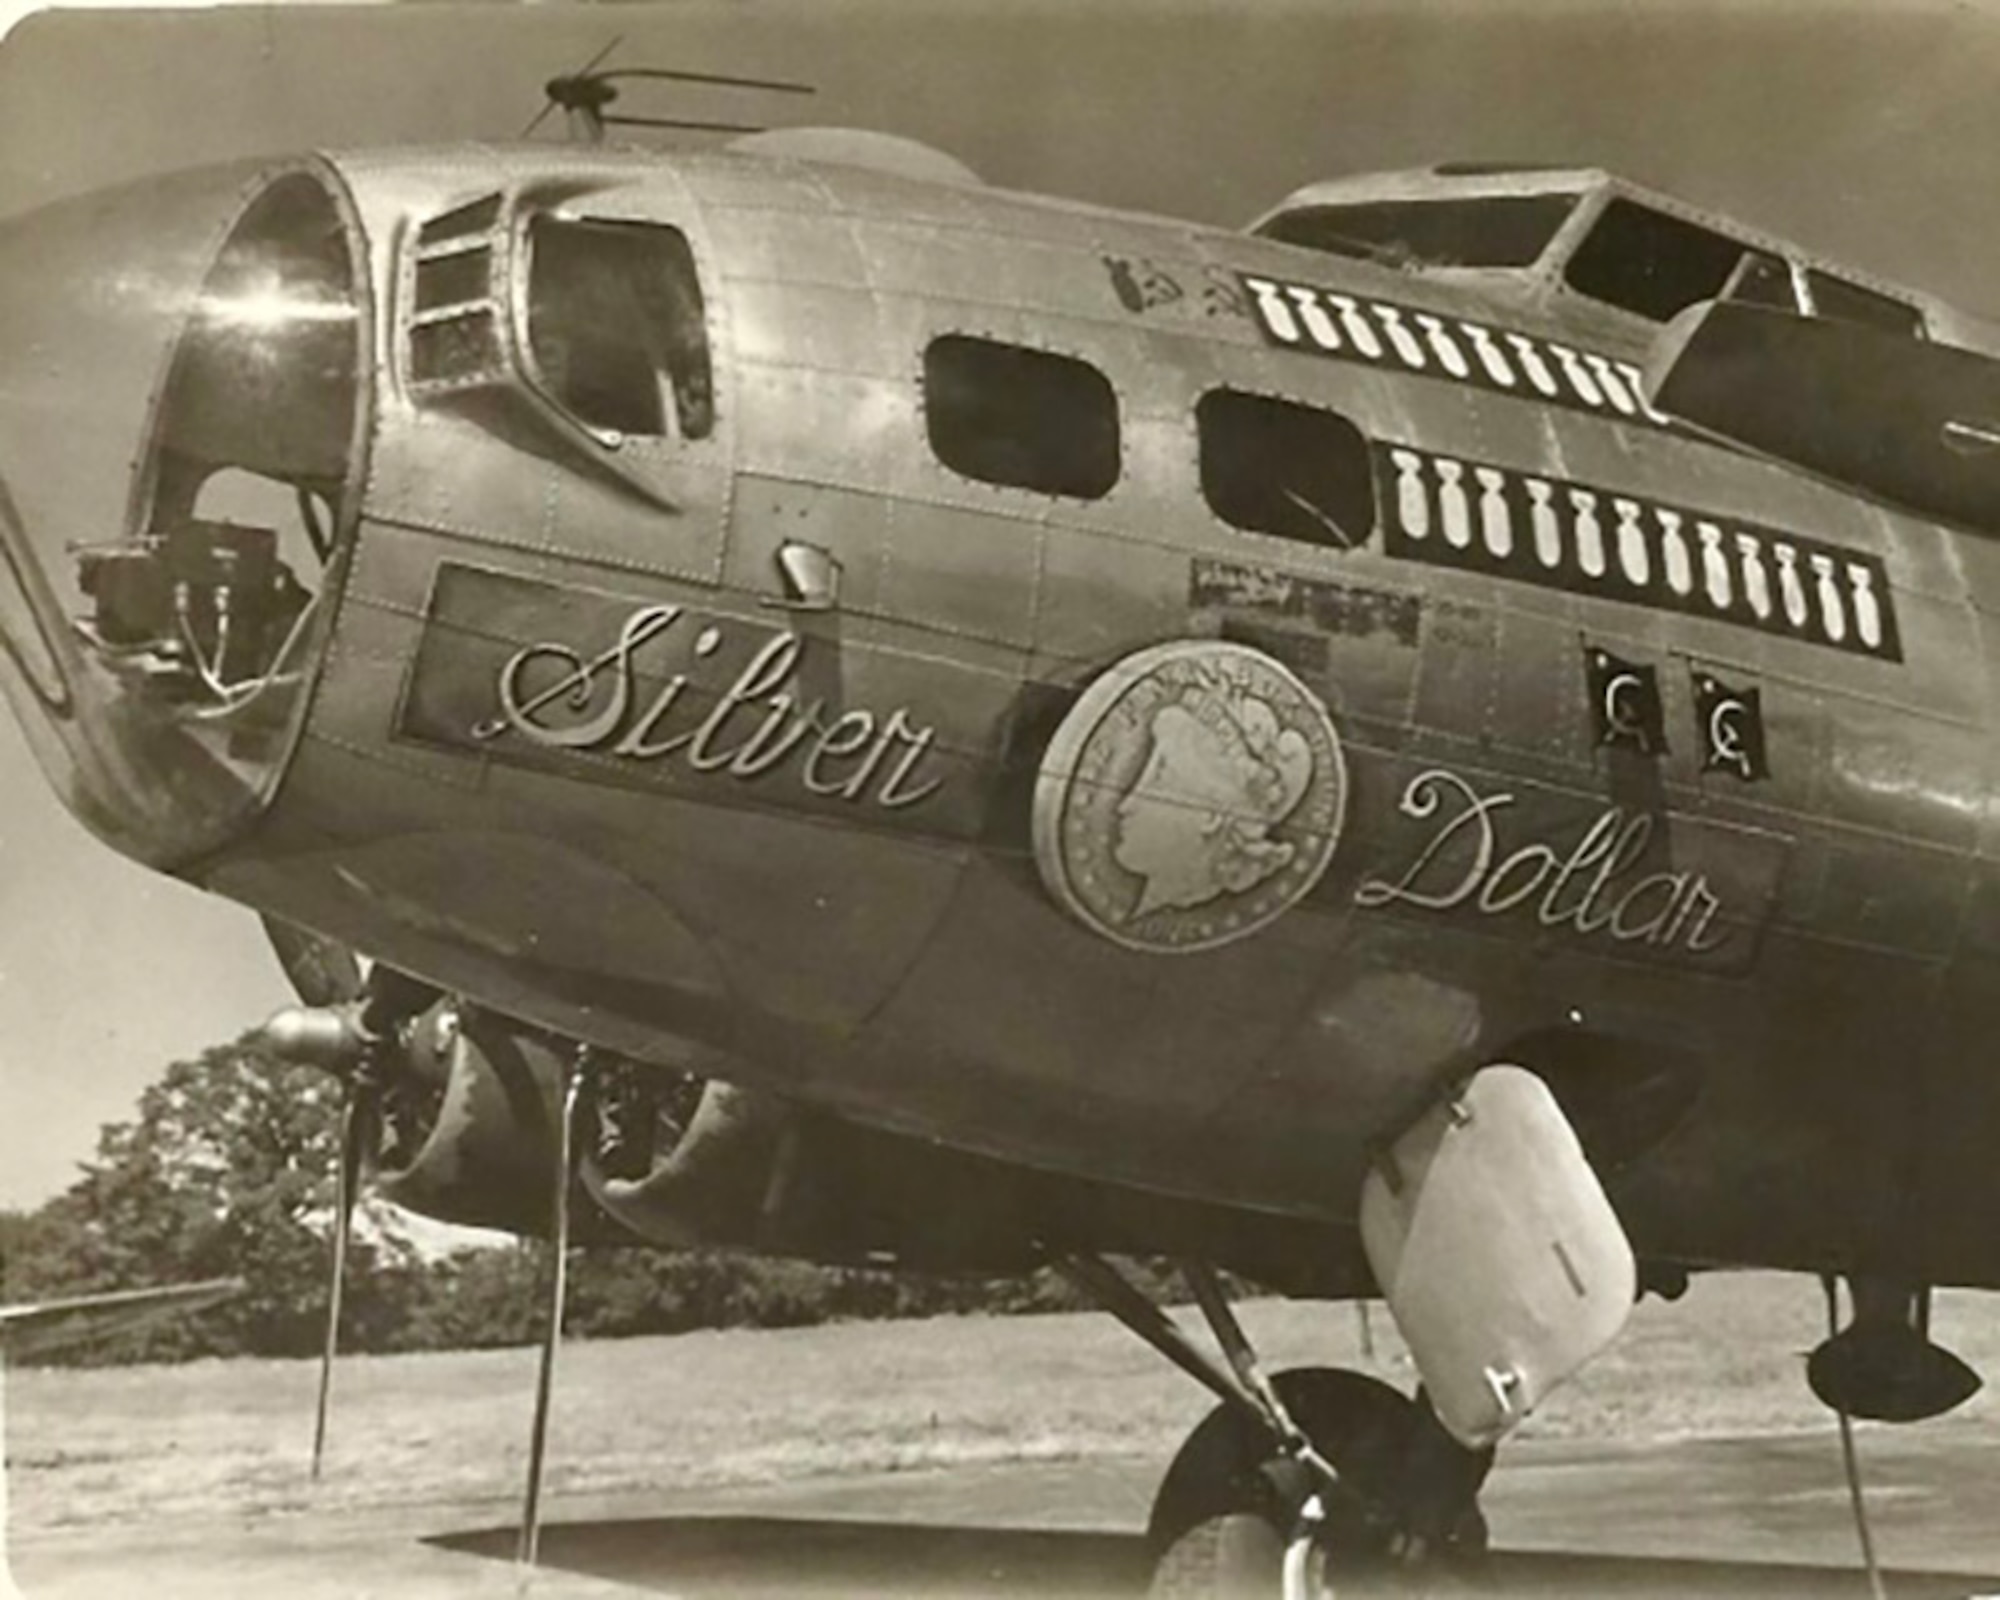 The original “Silver Dollar” nose art from World War II is painted on a B-17 Flying Fortress, tail number 23-2090. Eighty years later, an updated version of it was unveiled on a KC-135 Stratotanker from the 100th Air Refueling Wing, Royal Air Force Mildenhall, England, Oct. 10, 2023. After multiple combat missions, Silver Dollar was hit while taxiing on the ground at Thorpe Abbotts, Norfolk, England, by another B-17 – “Heavenly Angel.” The tail of the second plane was removed and placed on Silver Dollar; the aircraft’s call sign was then changed from ‘D-Dog’ to ‘E-Easy,’ effectively ending the aircraft’s official wartime service with the group. (Courtesy photo from the 100th Bomb Group Foundation archives)